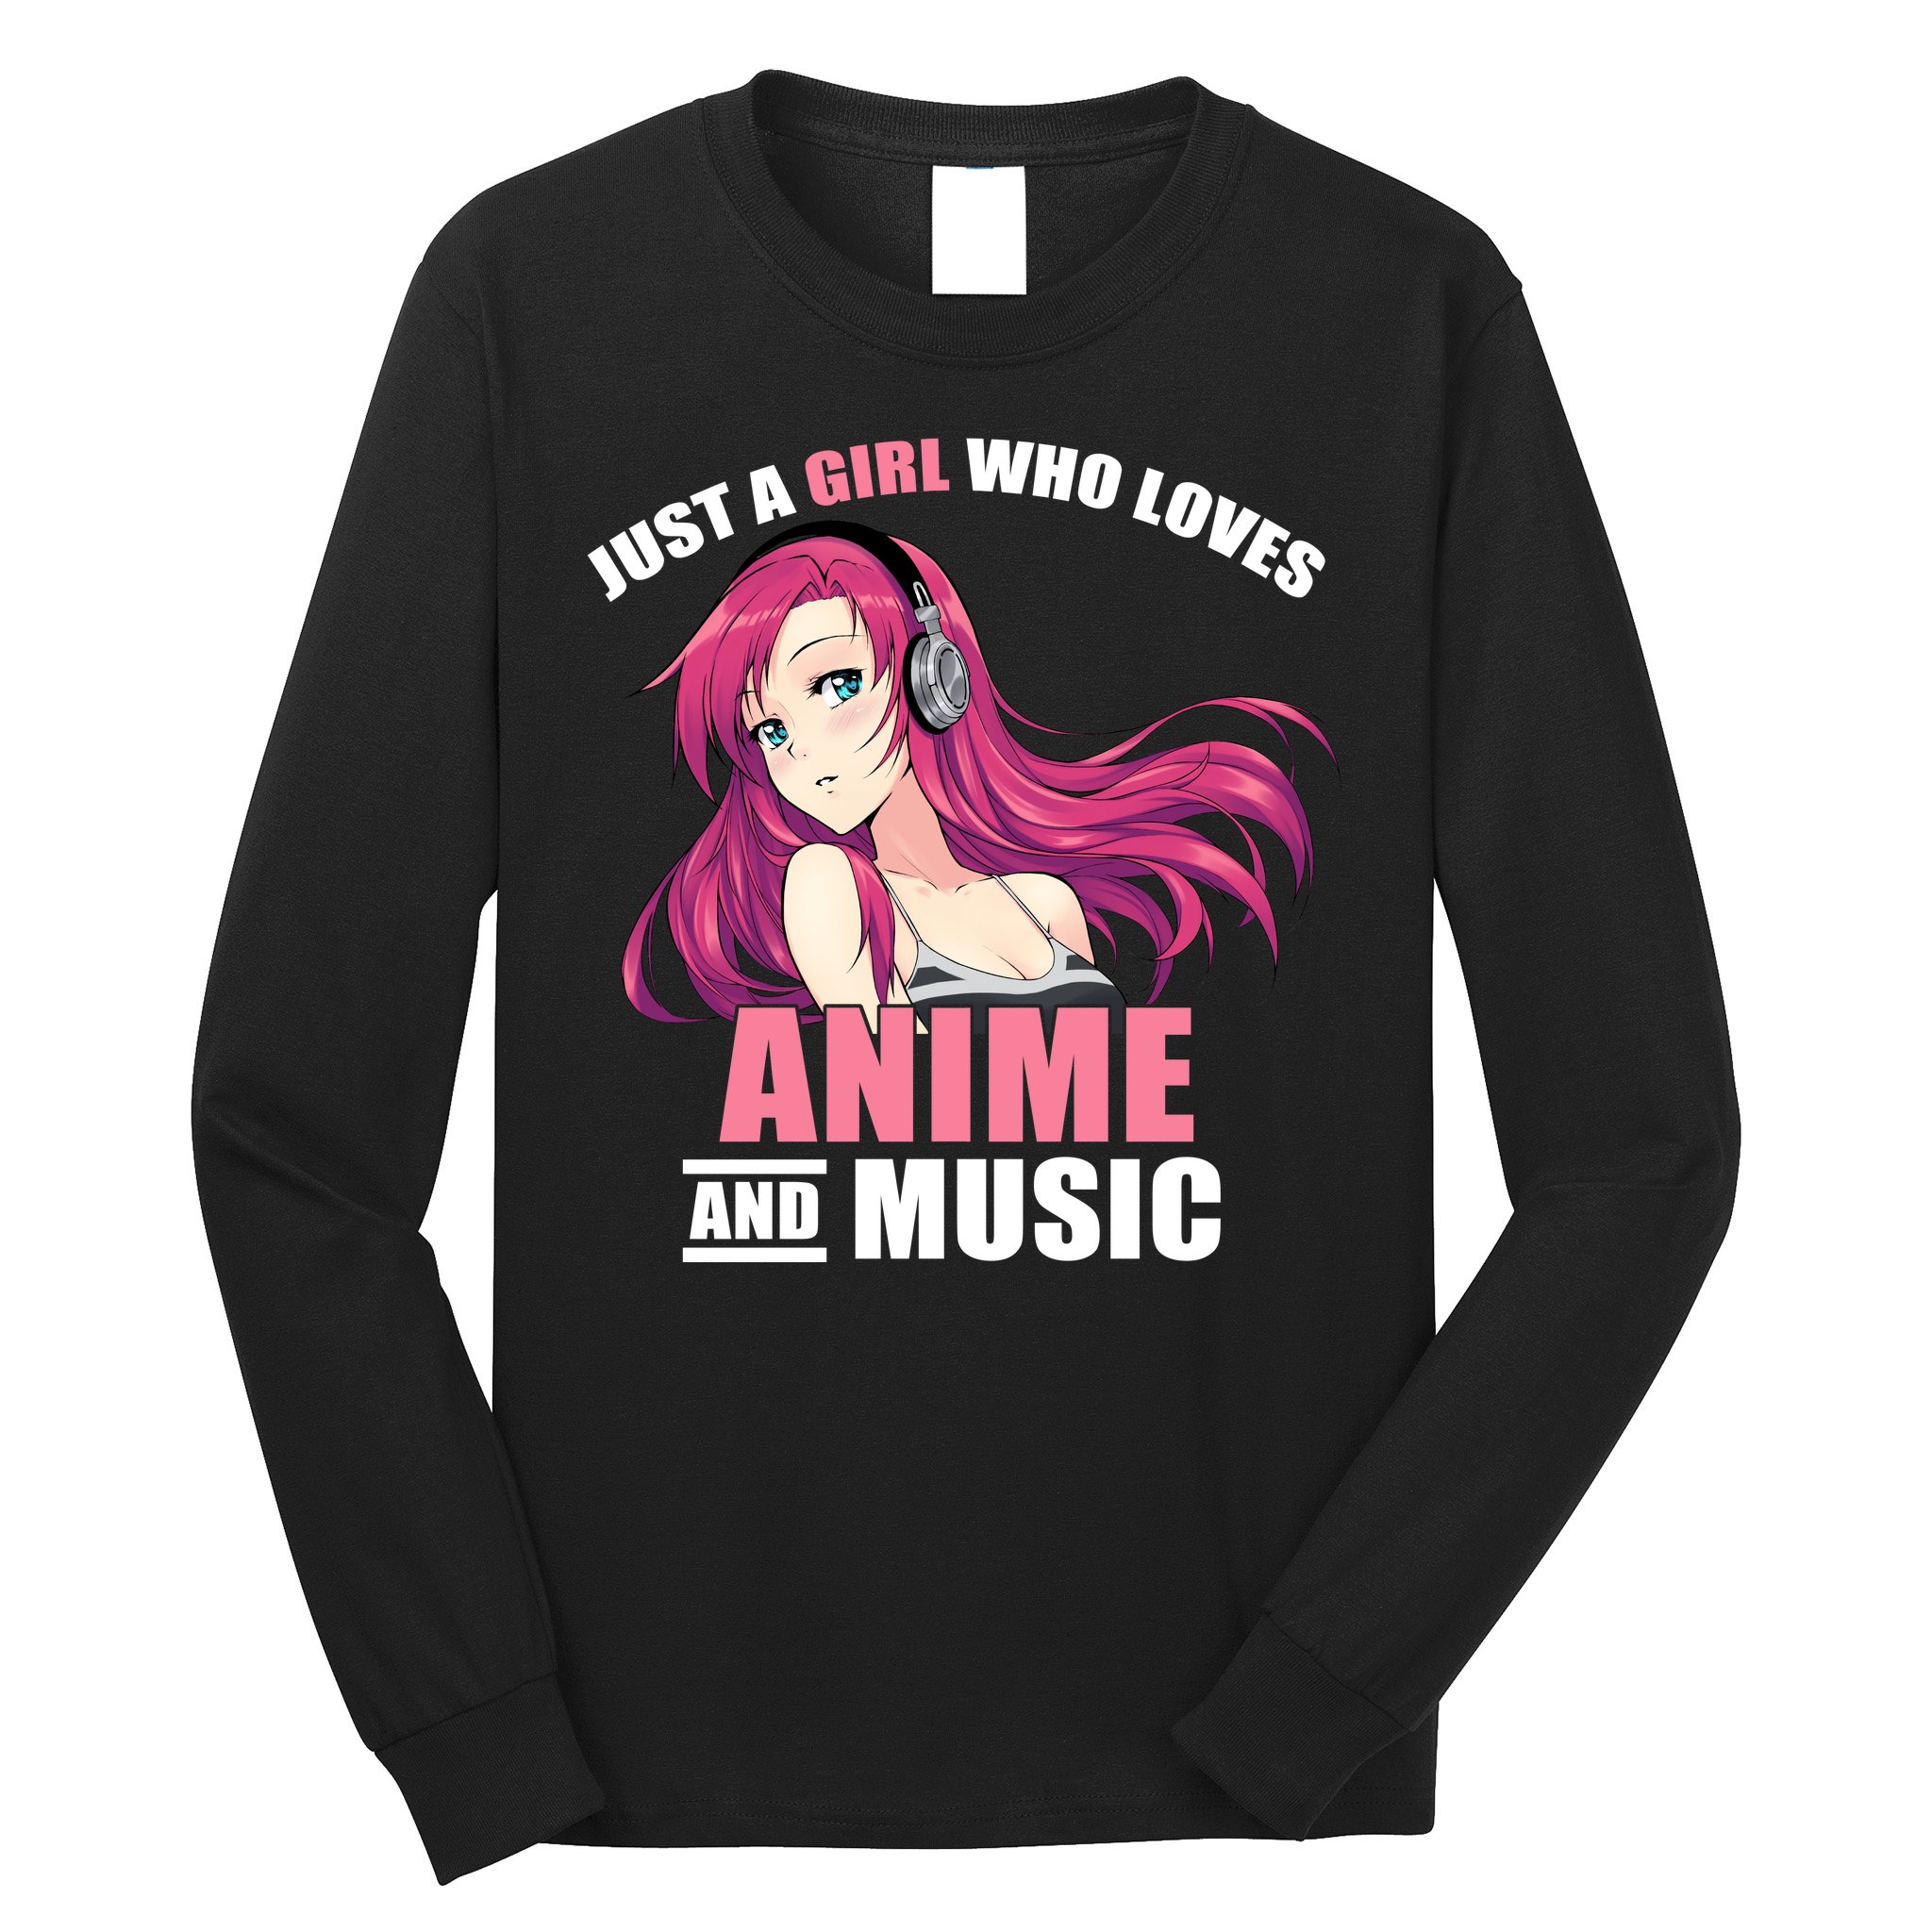 Anime I Only Care About Anime TShirt Men  S M L XL 2XL 3XL 4XL 5XL  Graphic Tee  Cool Funny Anime Clothes Gift for Men  Walmartcom